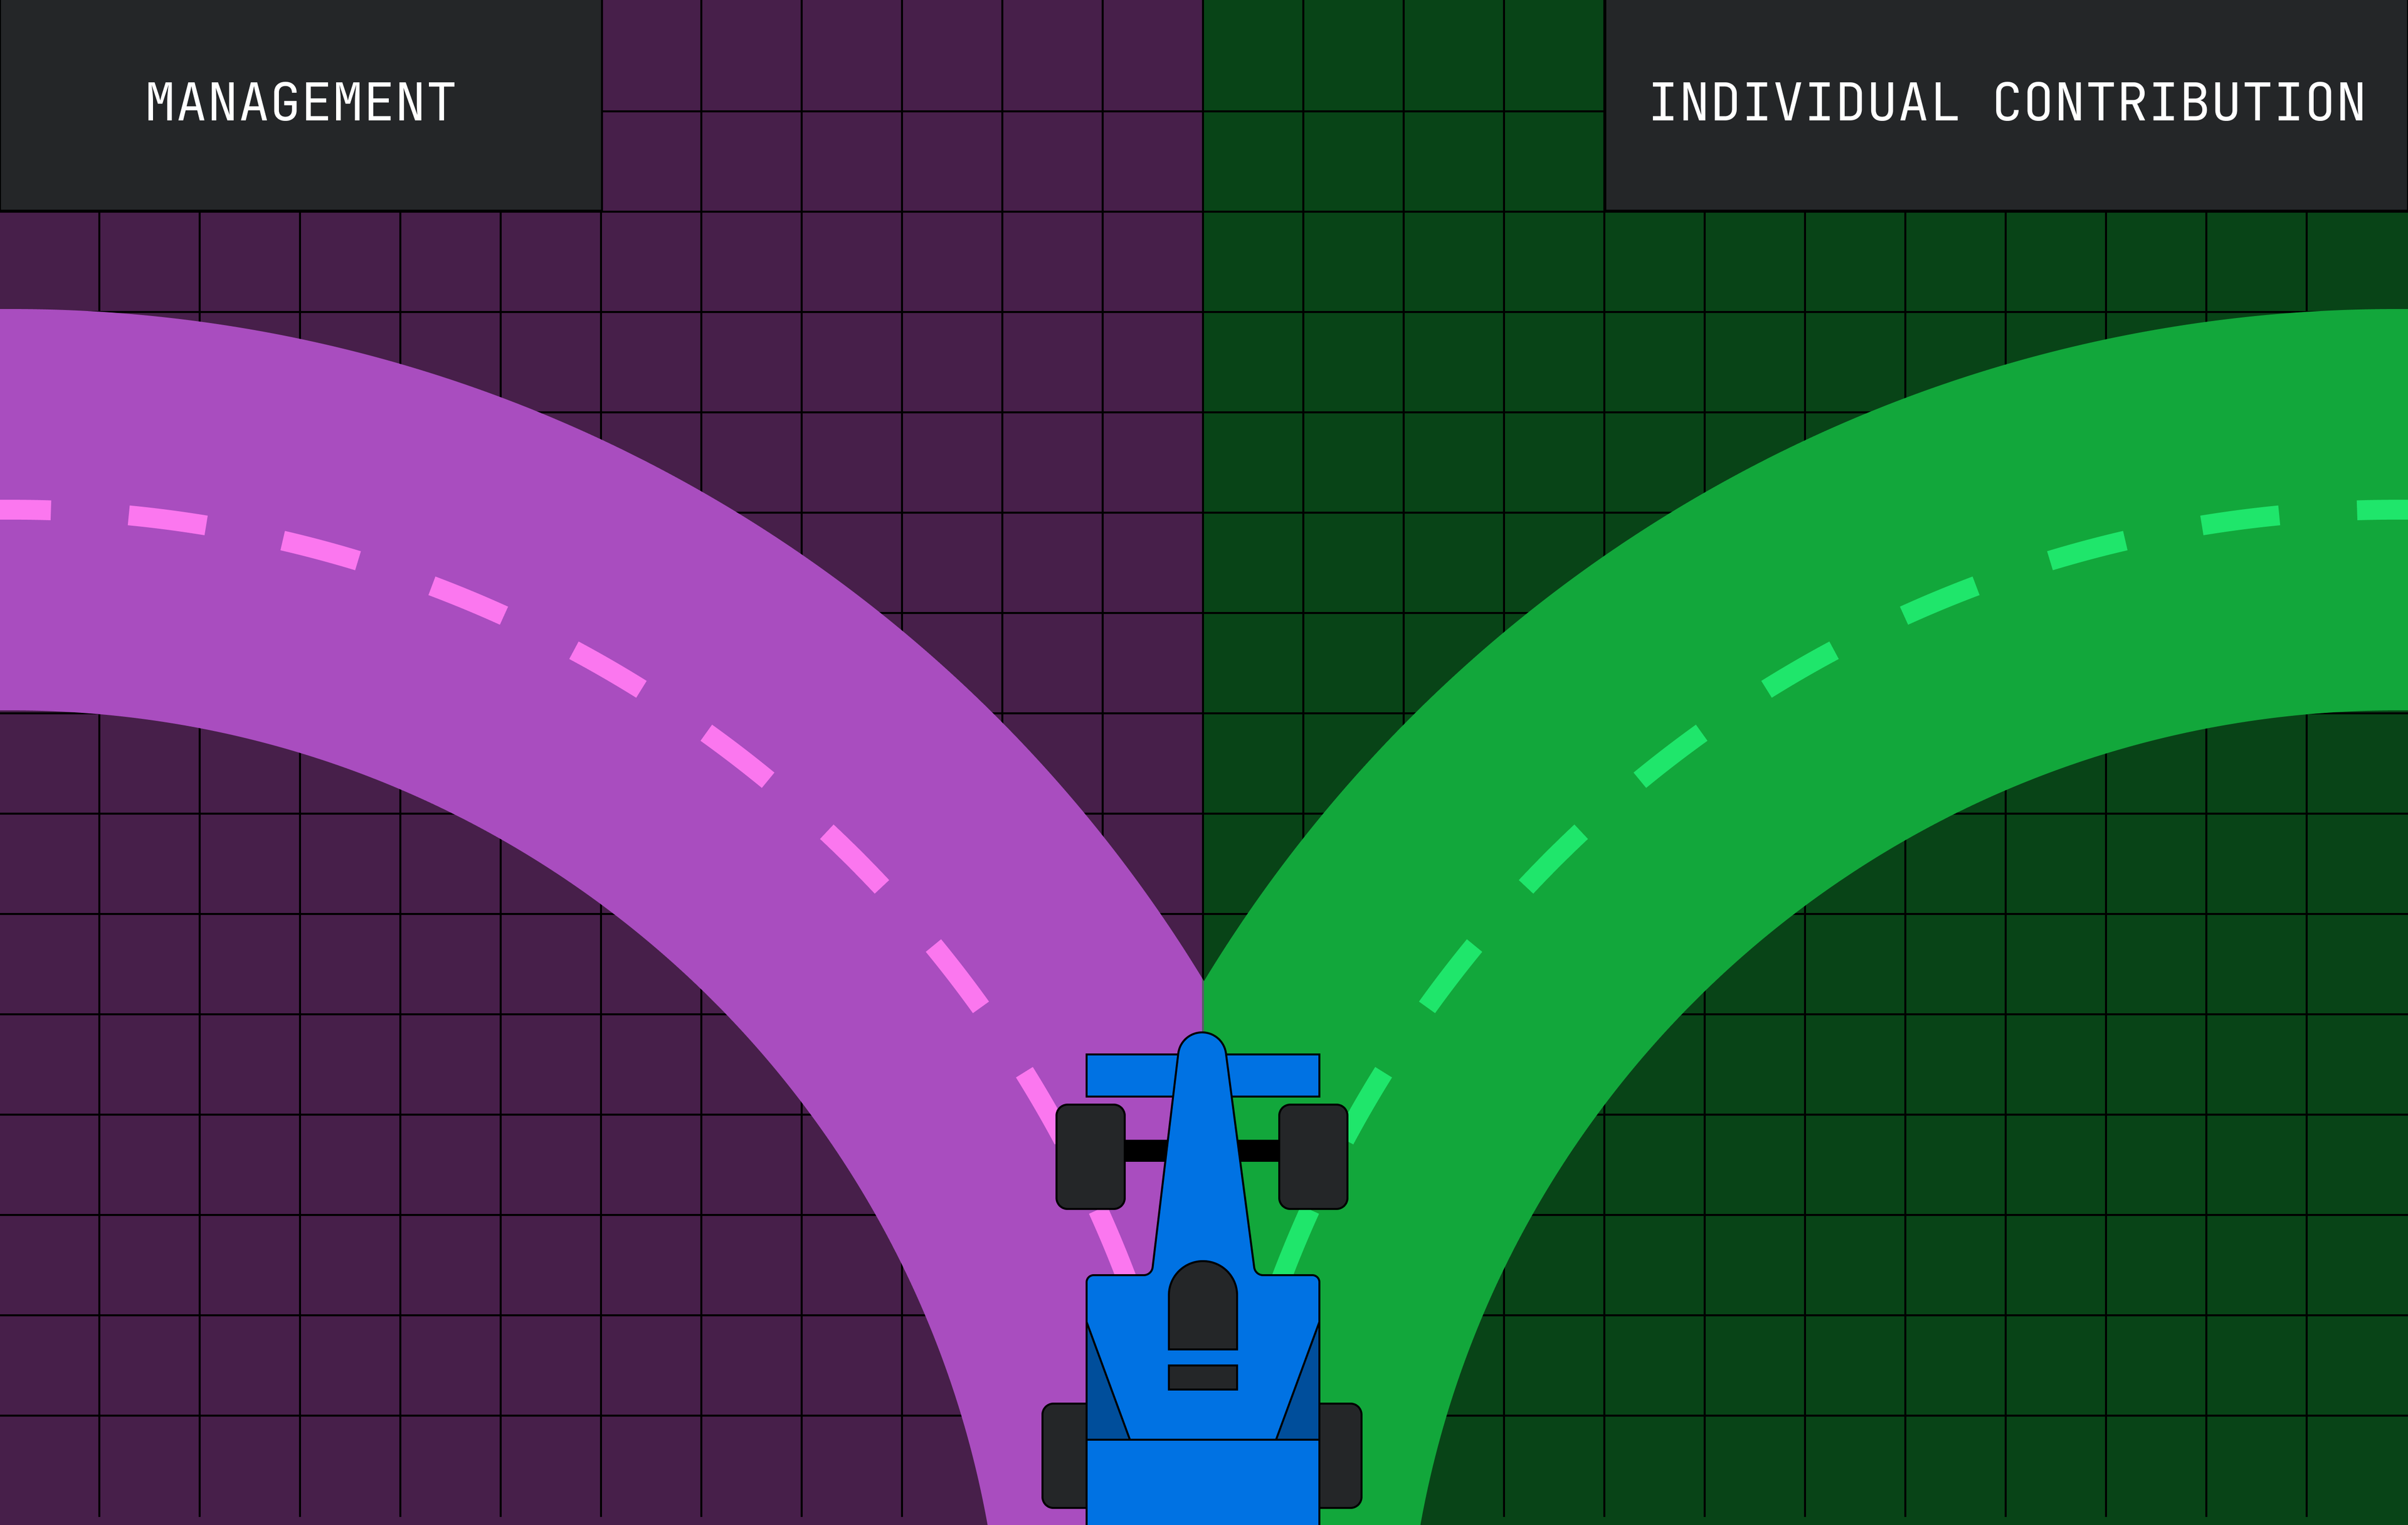 An illustration of a slot car coming to a fork in the track: to the left, a purple track labeled "Management" and to the right is a green track labeled "Individual Contributor"